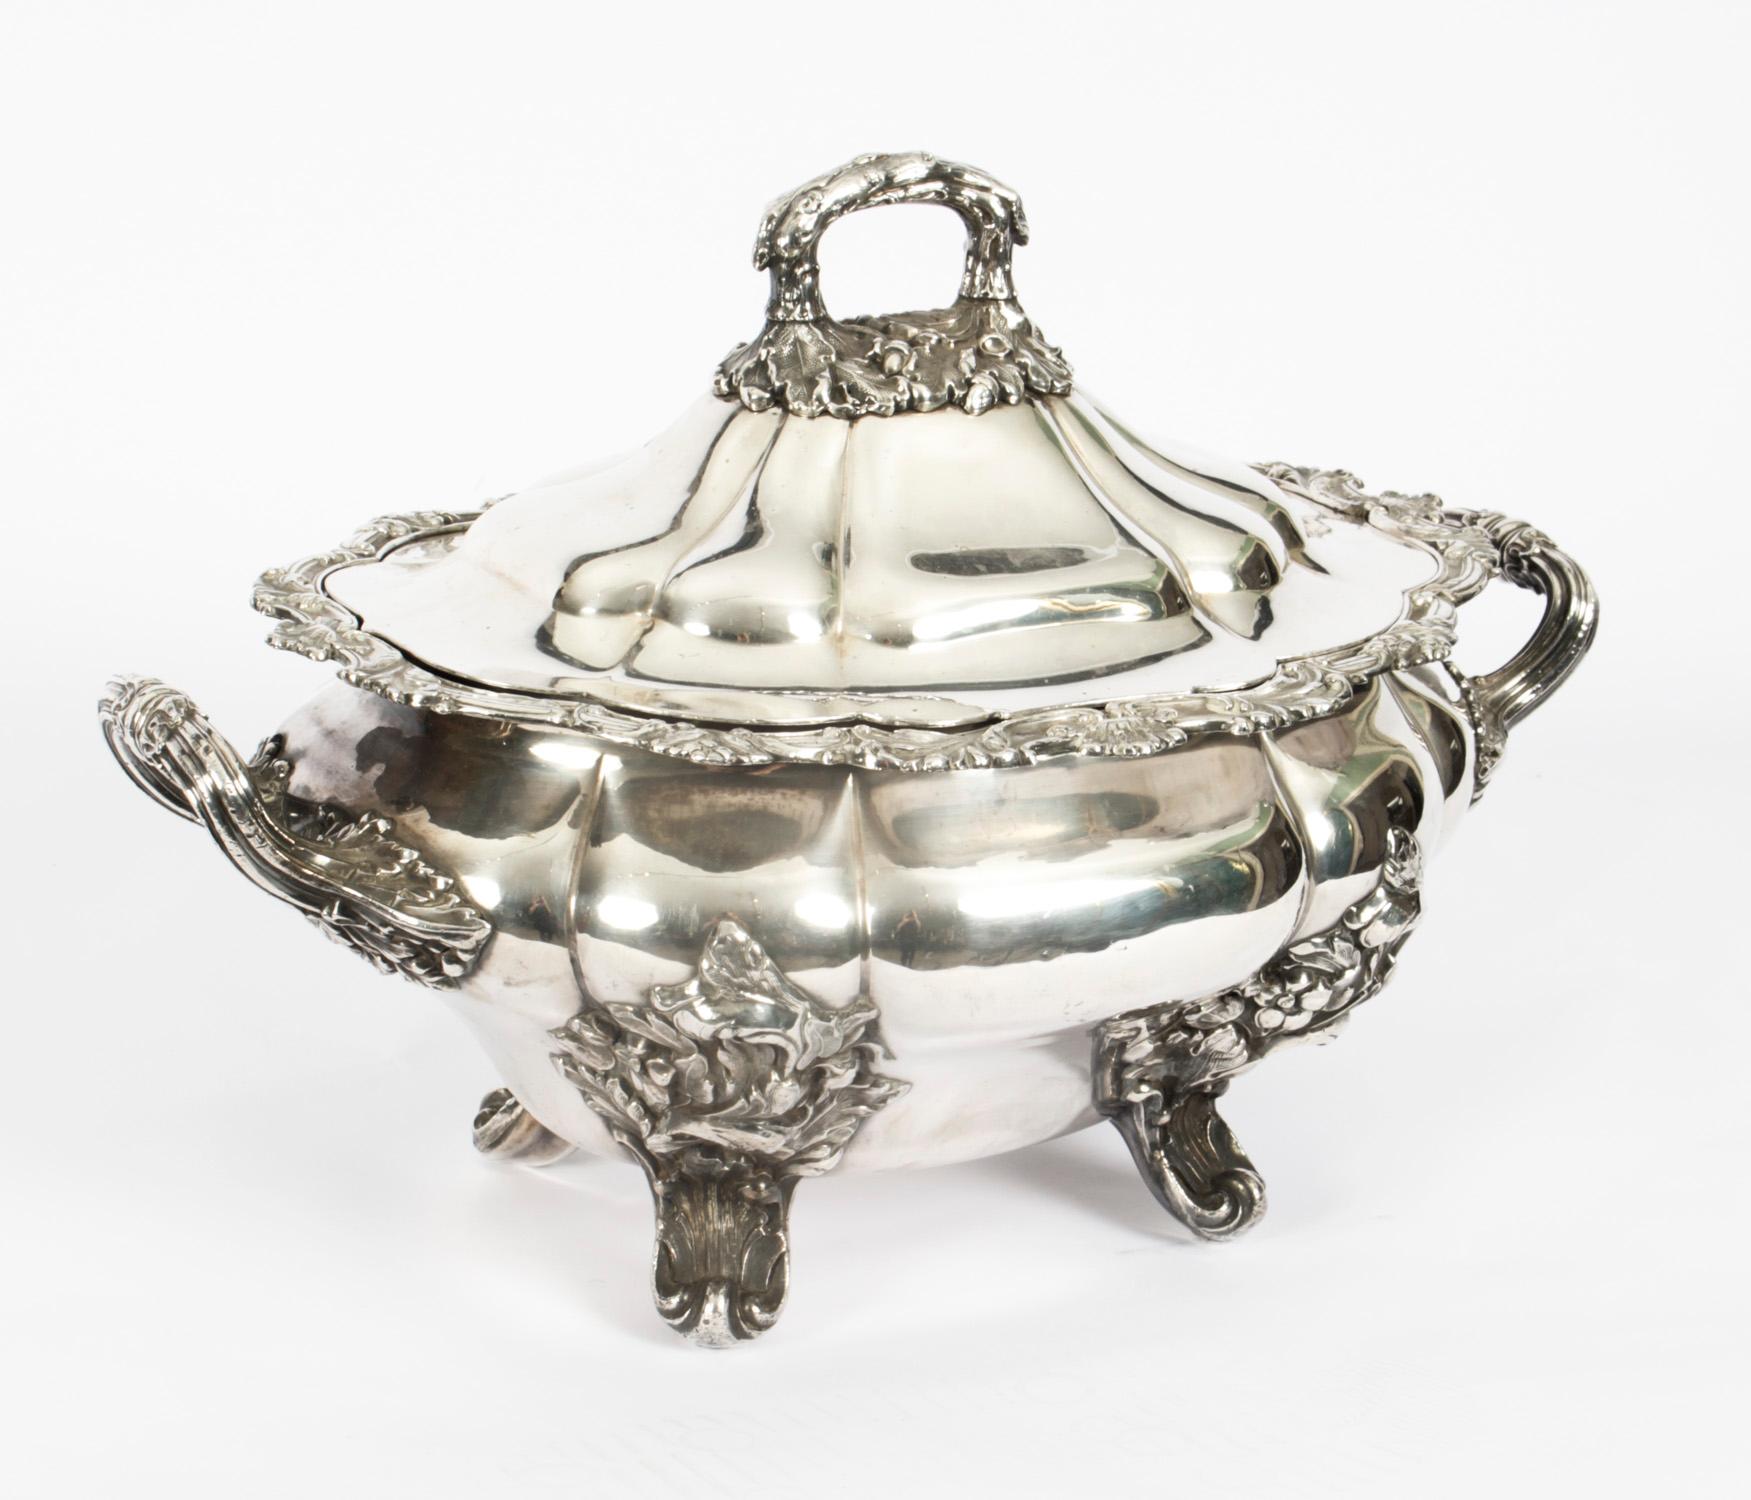 This is a magnificent large antique English Old Sheffield silver plate tureen with the original domed cover, circa 1790 in date.

It bears the crosskeys mark for I.E stands for John Edwards III,
 
This stunning tureen is oval in shape and features